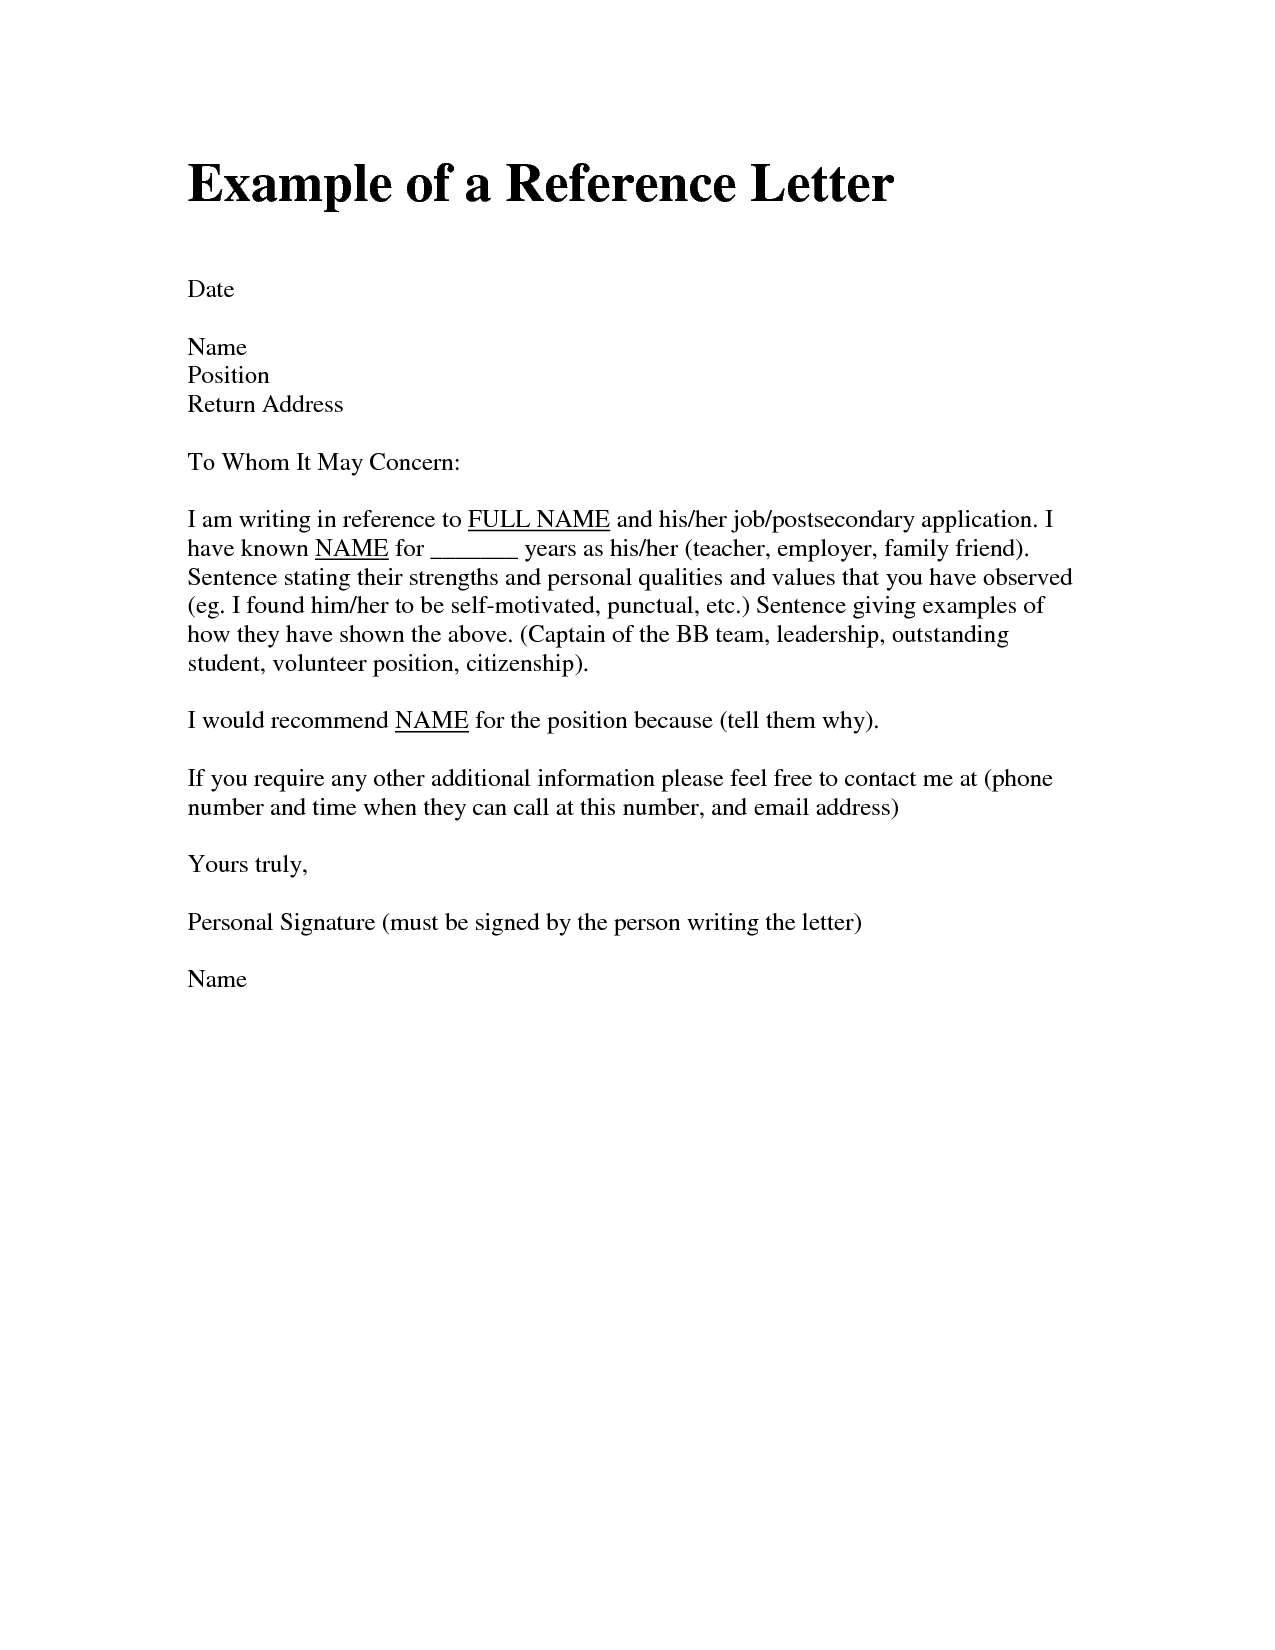 Personal Reference Letter For A Friend Personal Reference within size 1275 X 1650